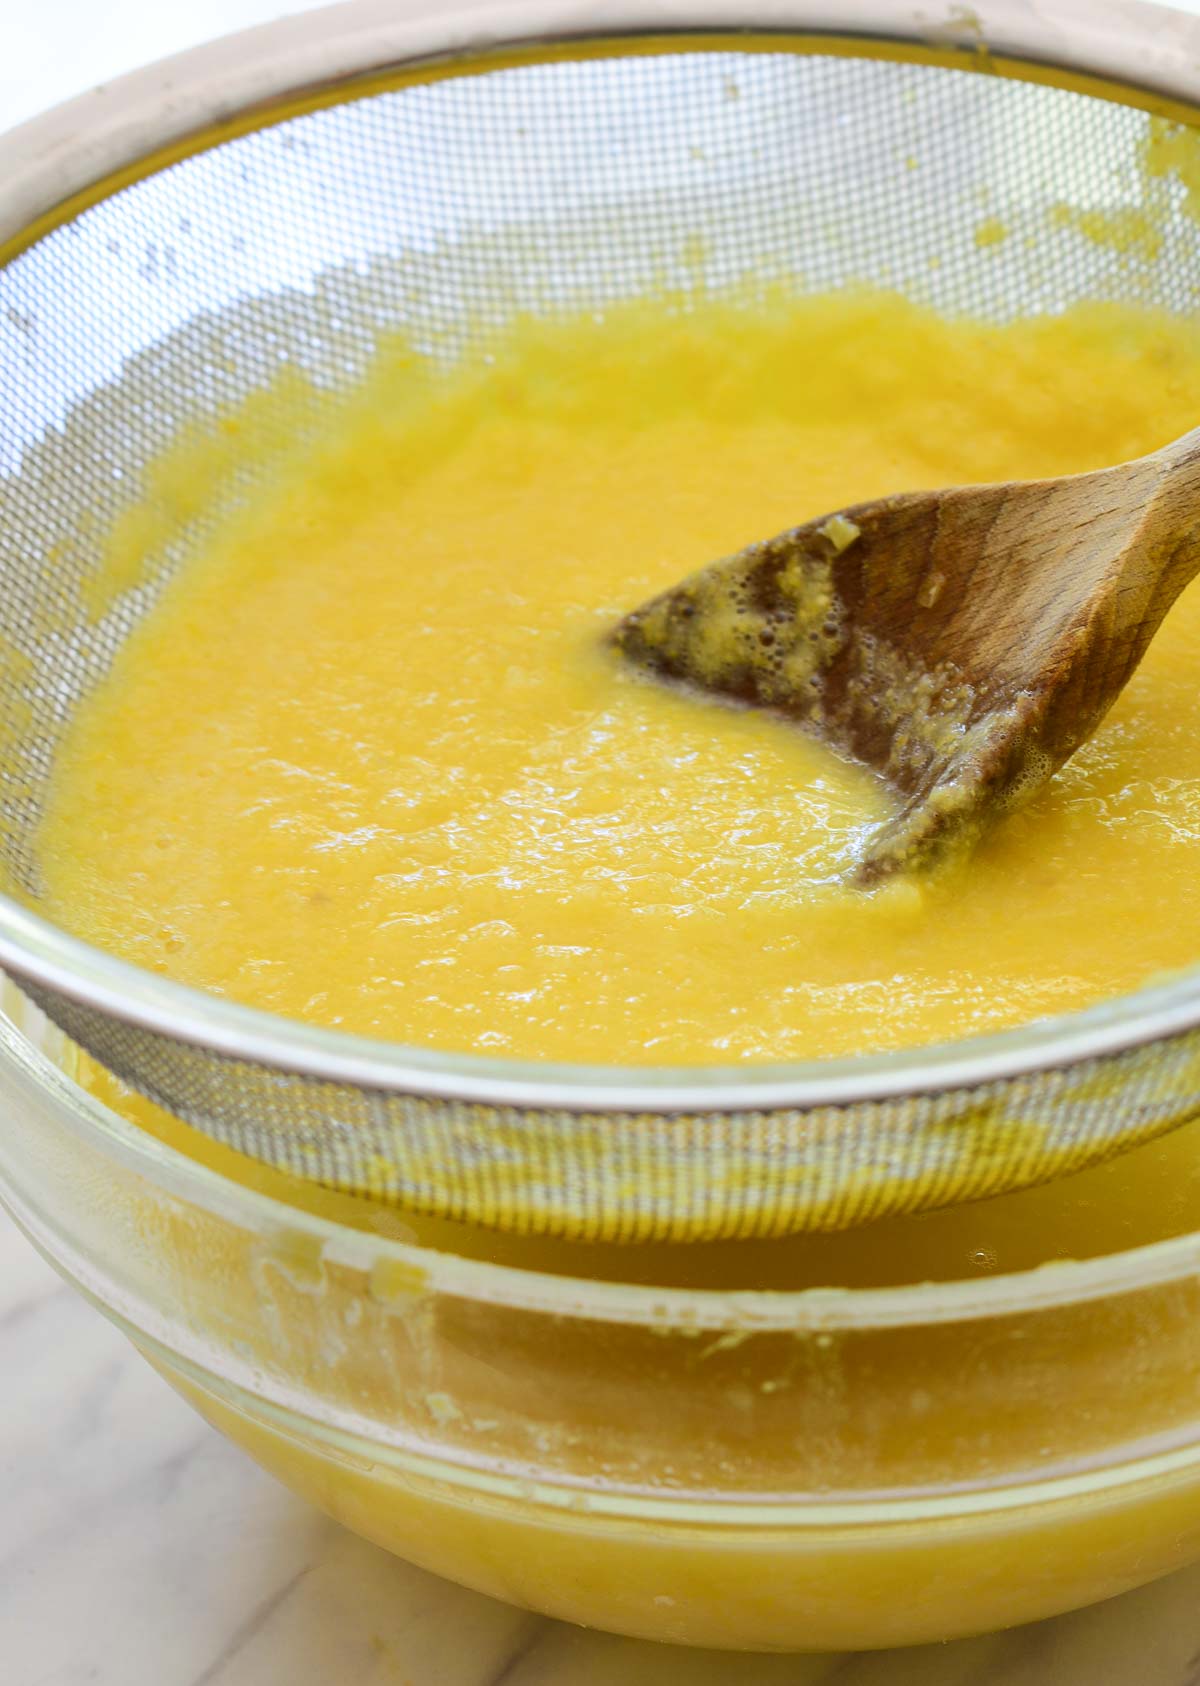 Straining the corn broth into a glass bowl through a fine mesh strainer with a wooden spoon.